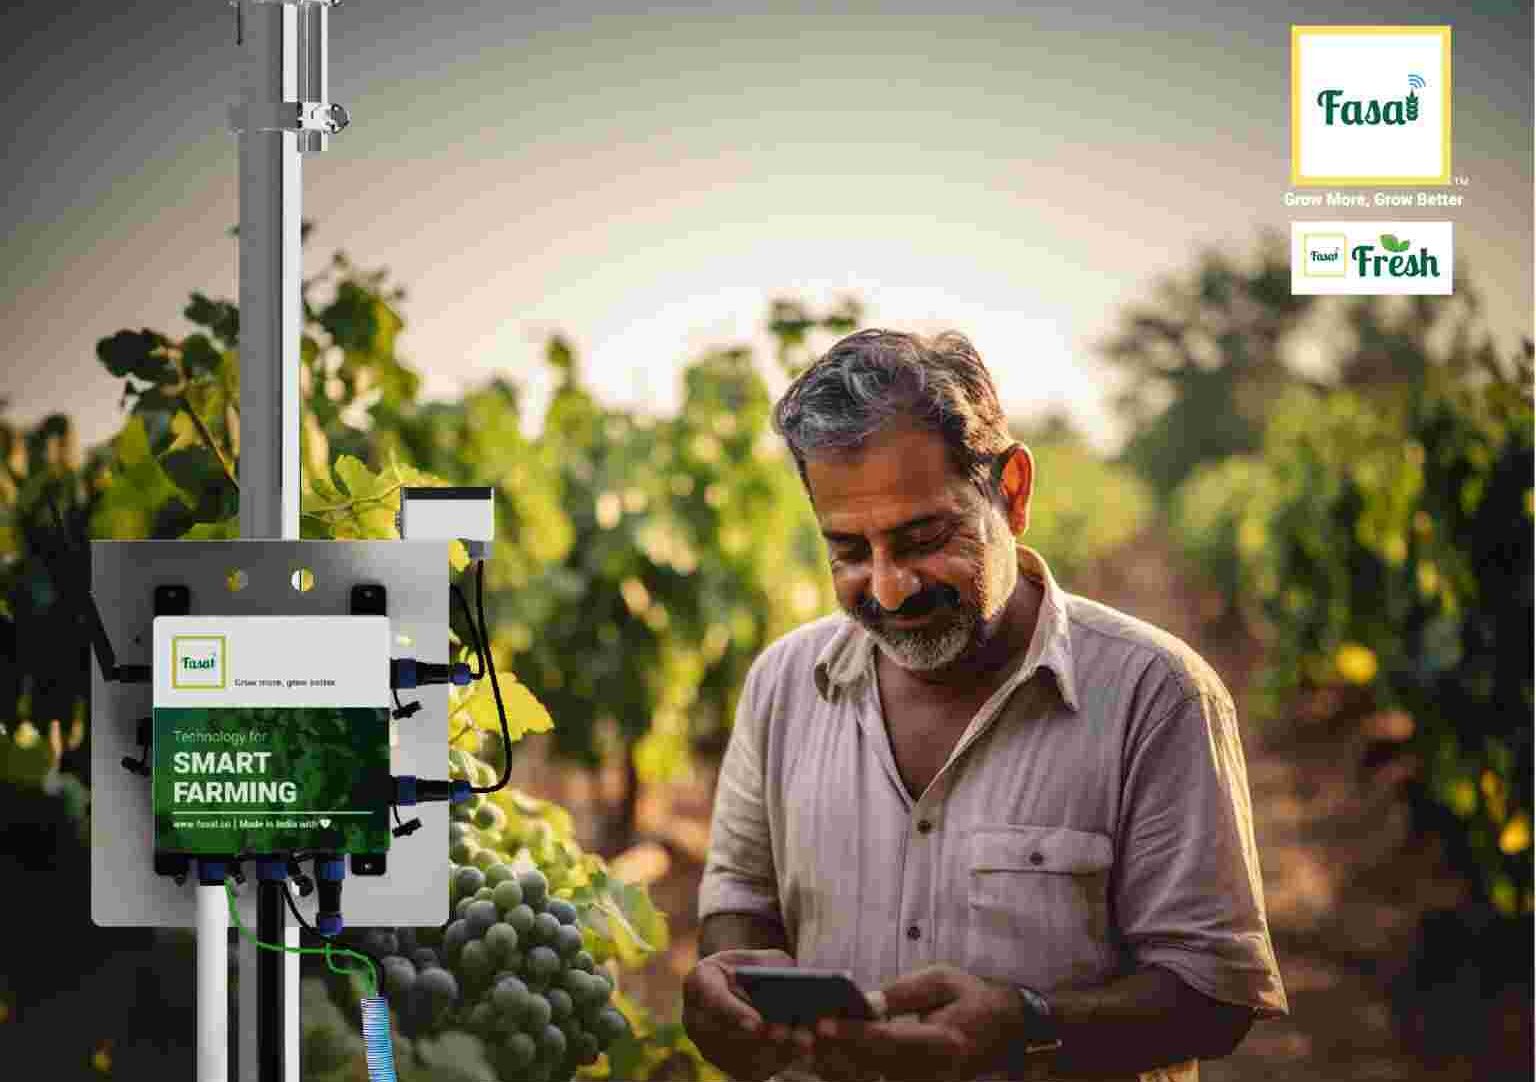 Agritech start-up Fasal raises Rs 100 crore to expand ‘Fasal Fresh’